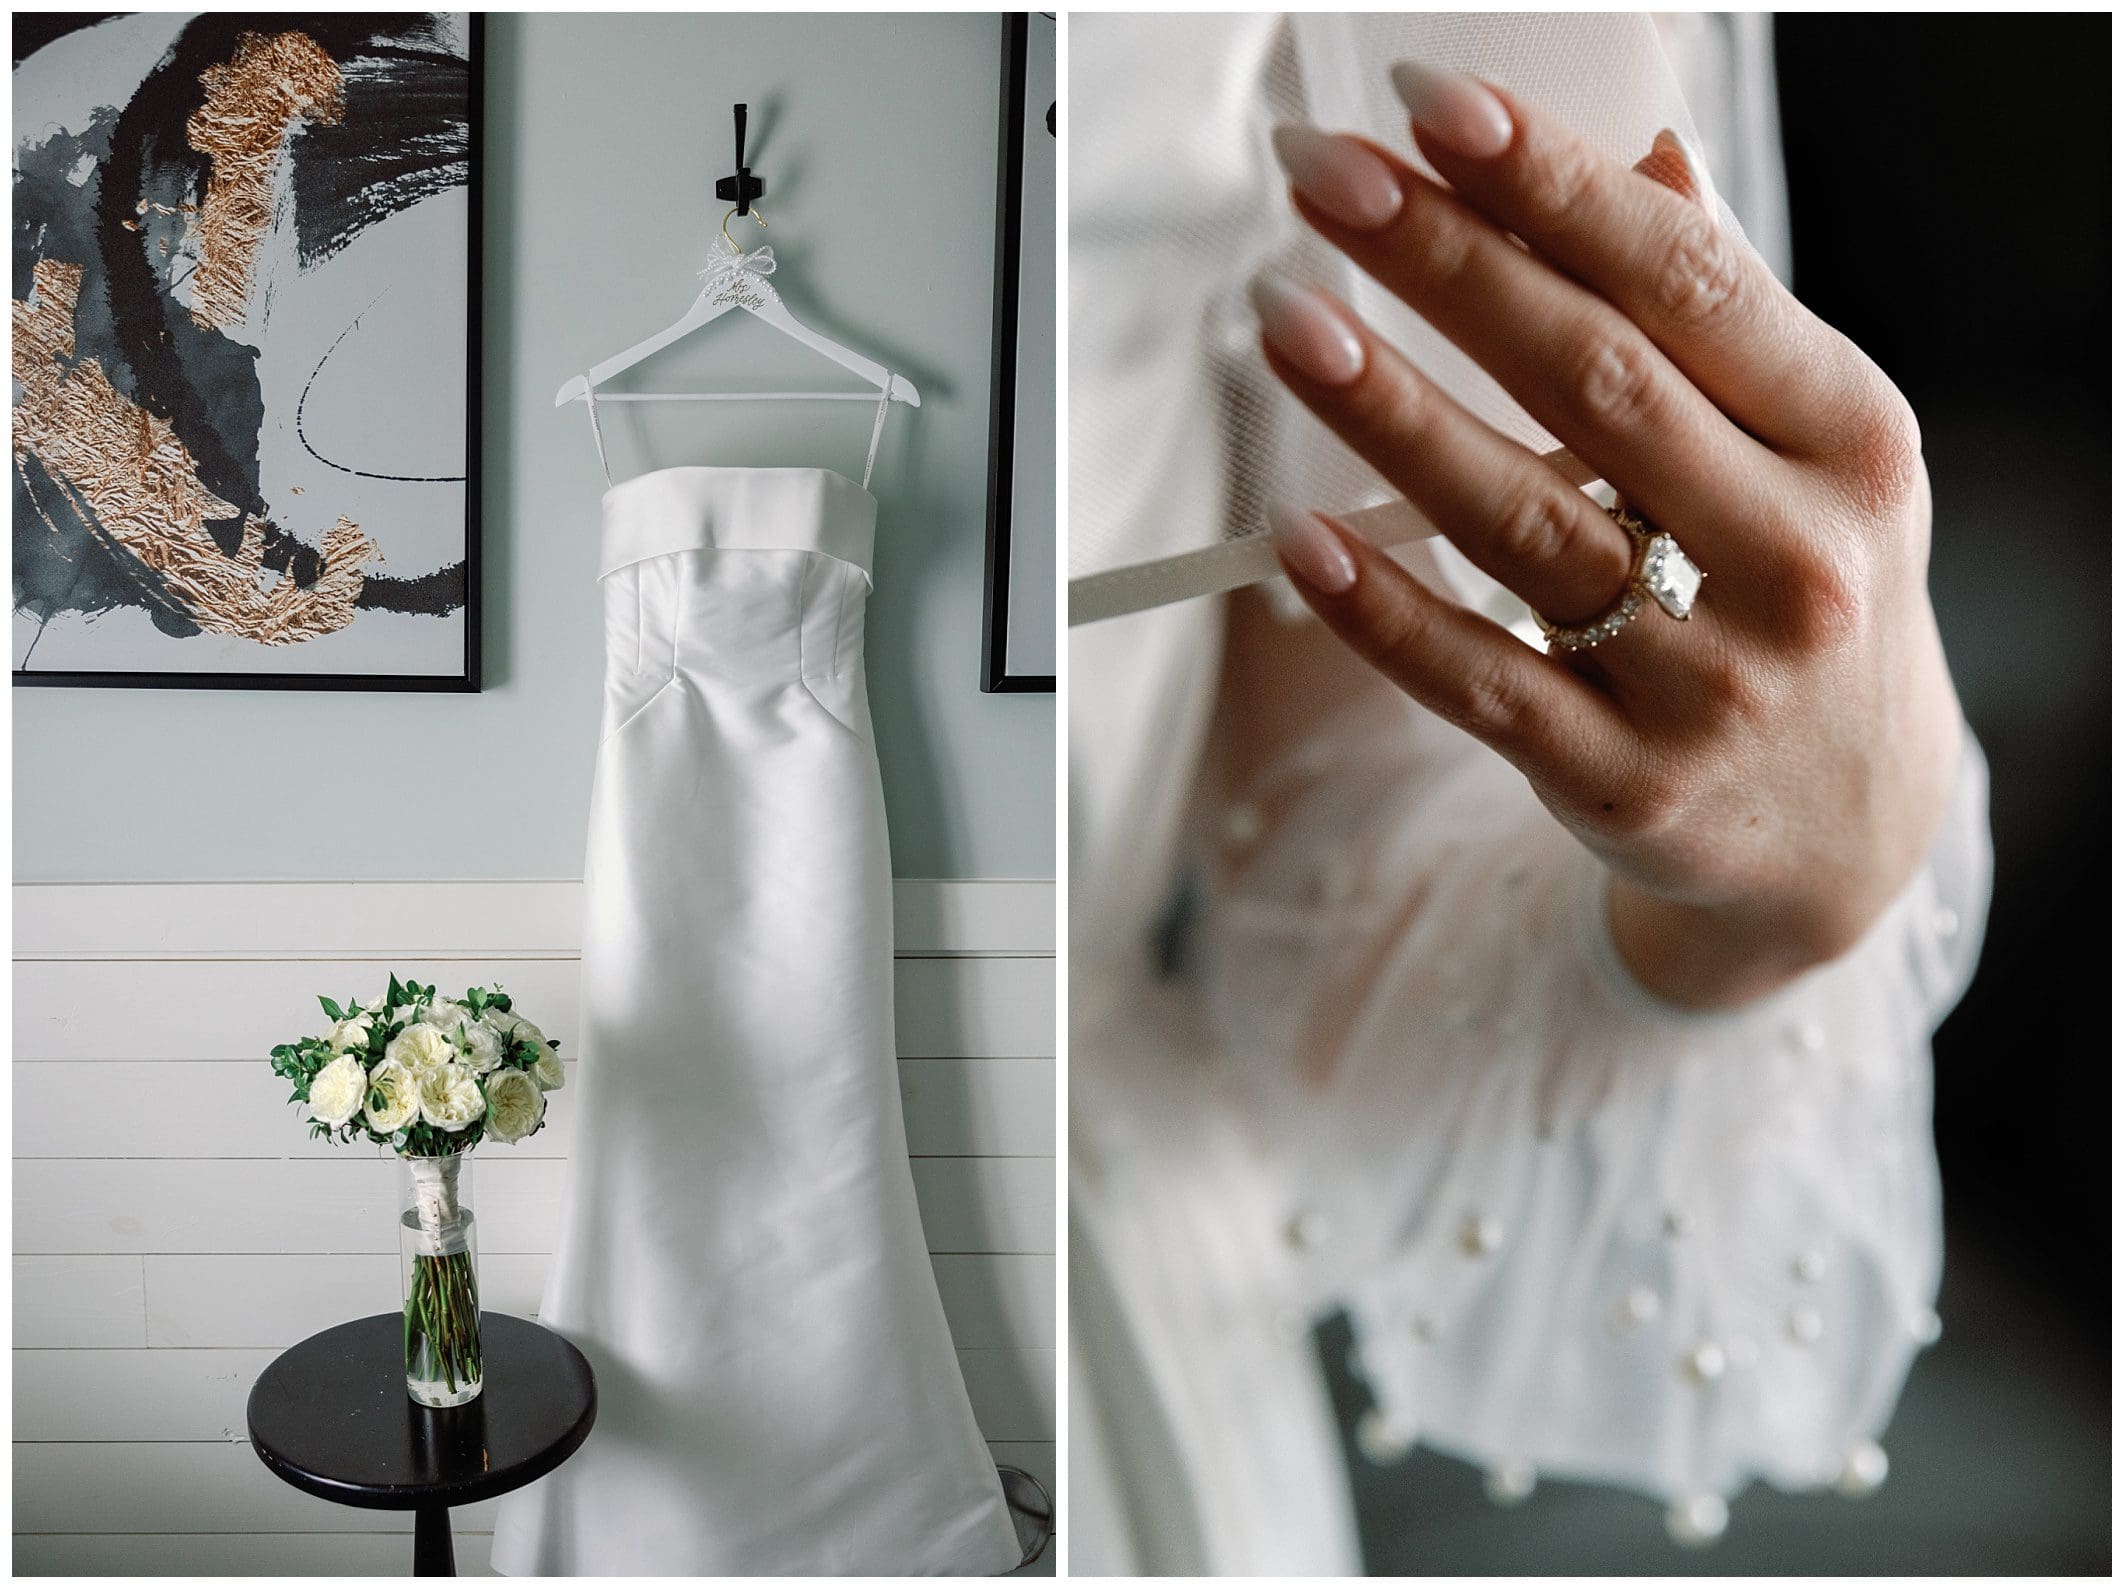 A split image featuring a wedding dress hanging next to a bouquet on the left, and a close-up of a bride's hand wearing a ring on the right.